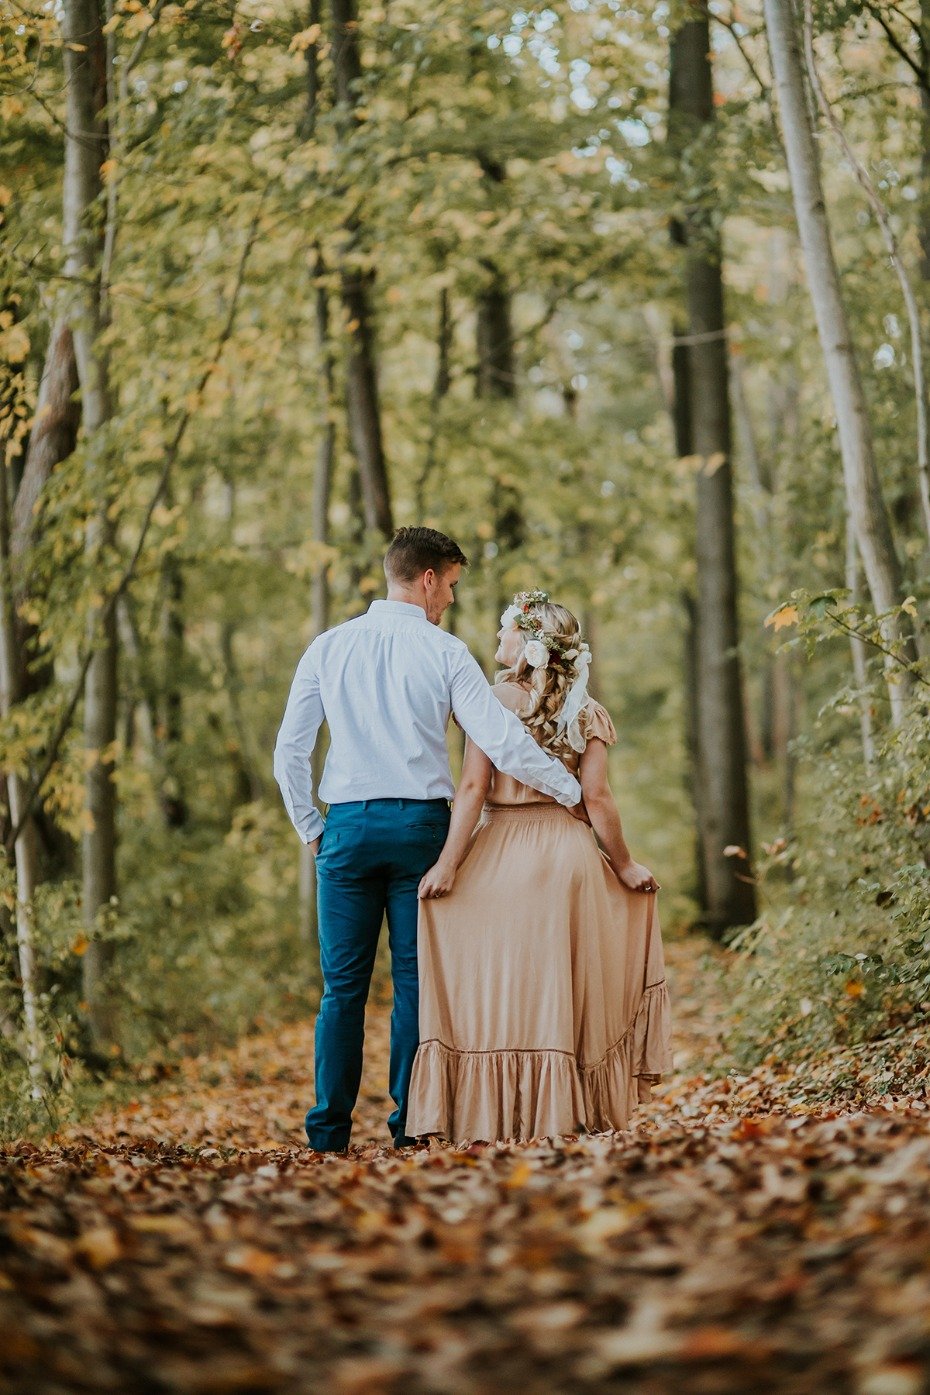 sweet engagement photo ideas for the fall